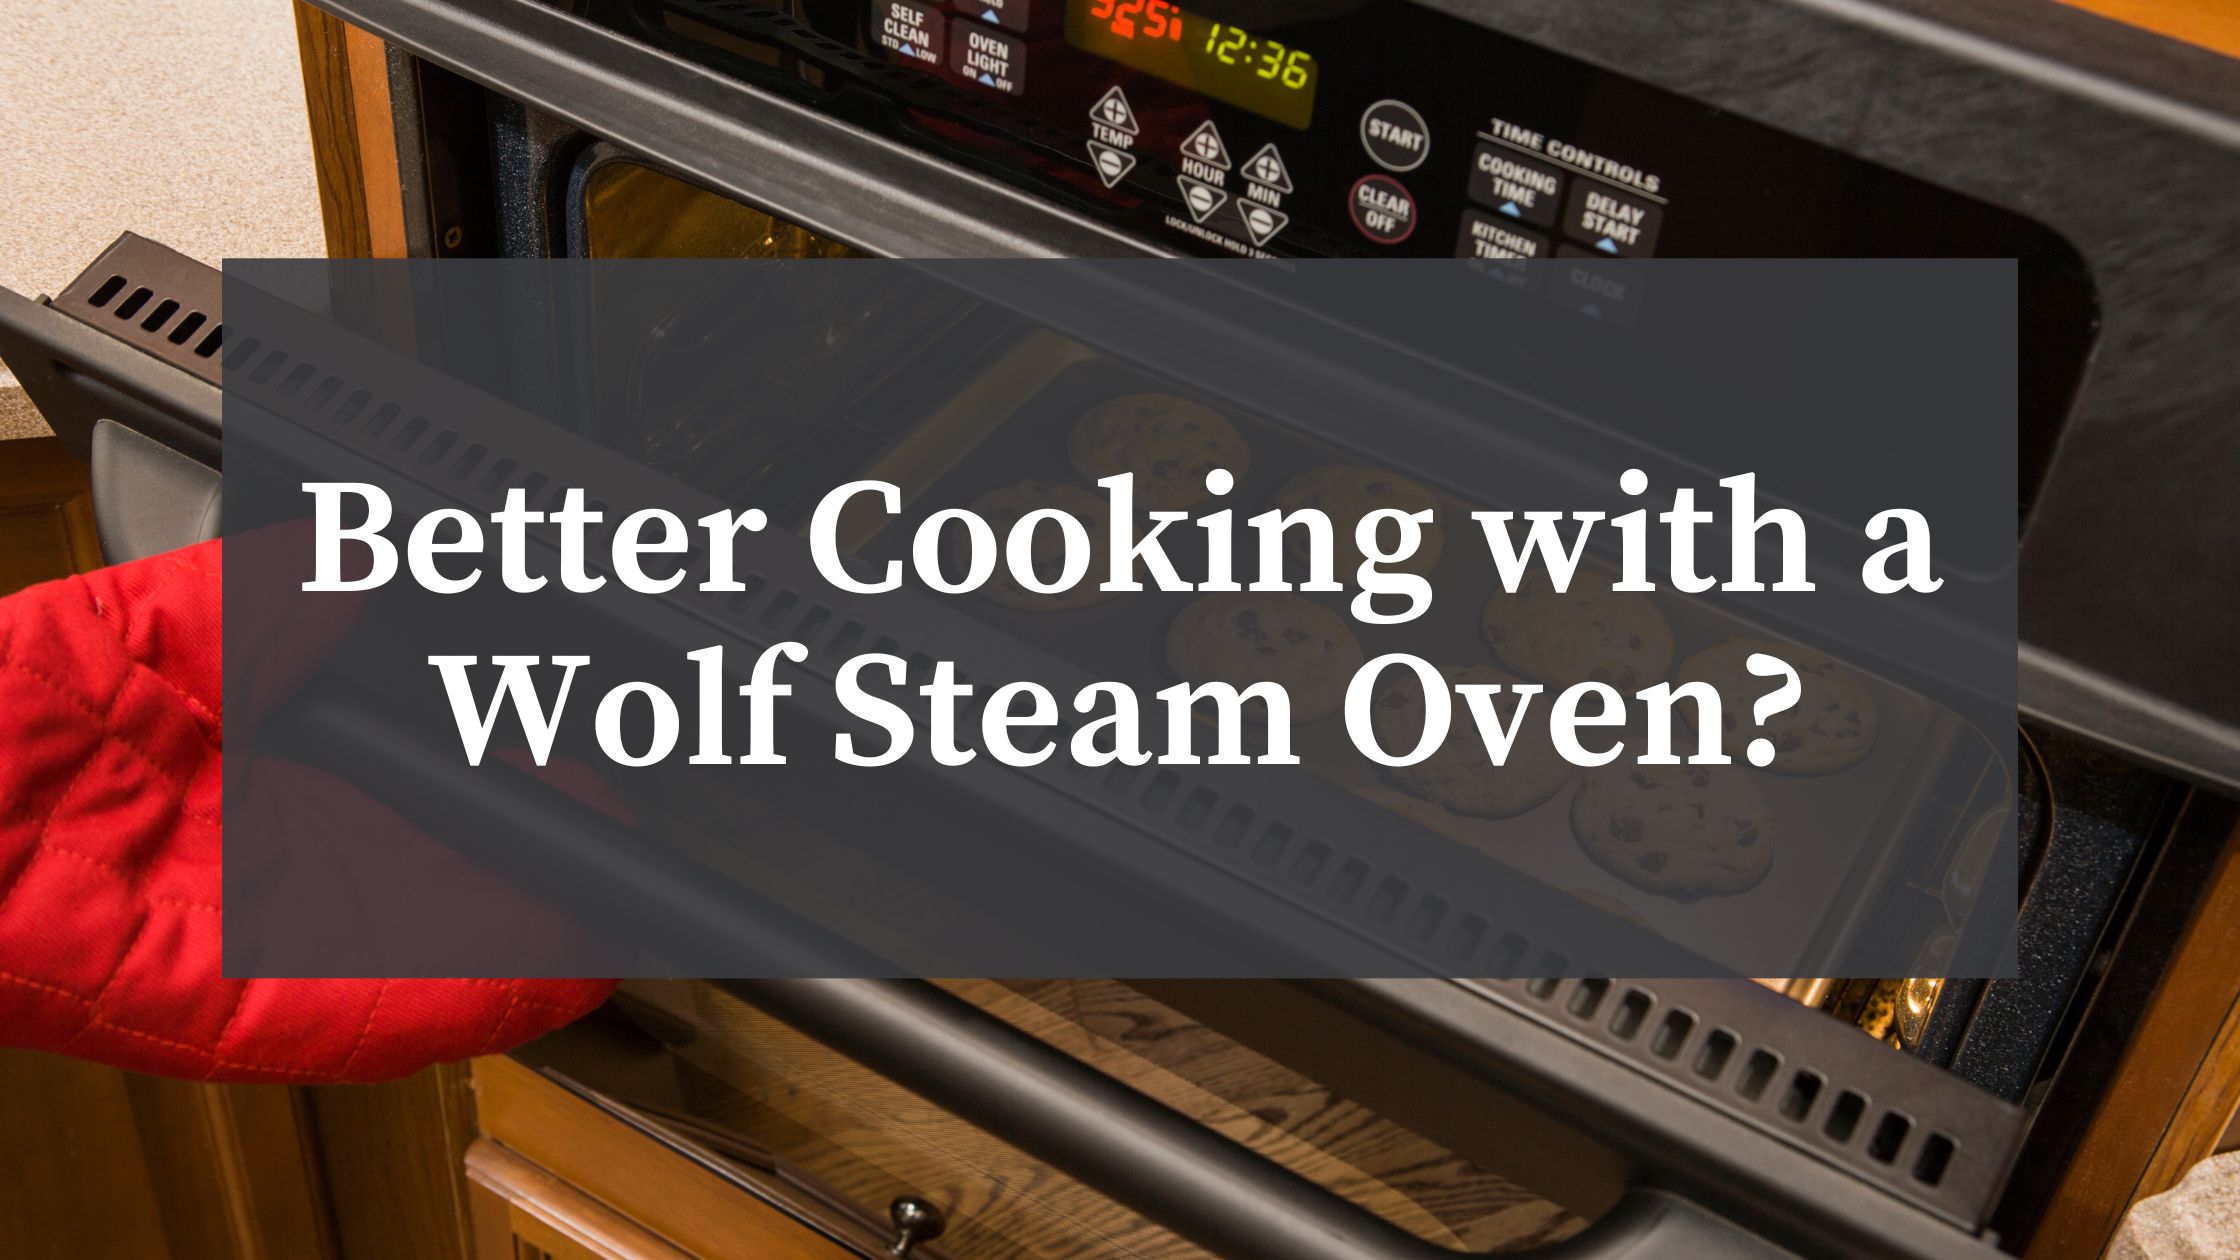 https://blog.athertonappliance.com/wp-content/uploads/2023/05/Better-Cooking-with-a-Wolf-Steam-Oven-Atherton.jpg